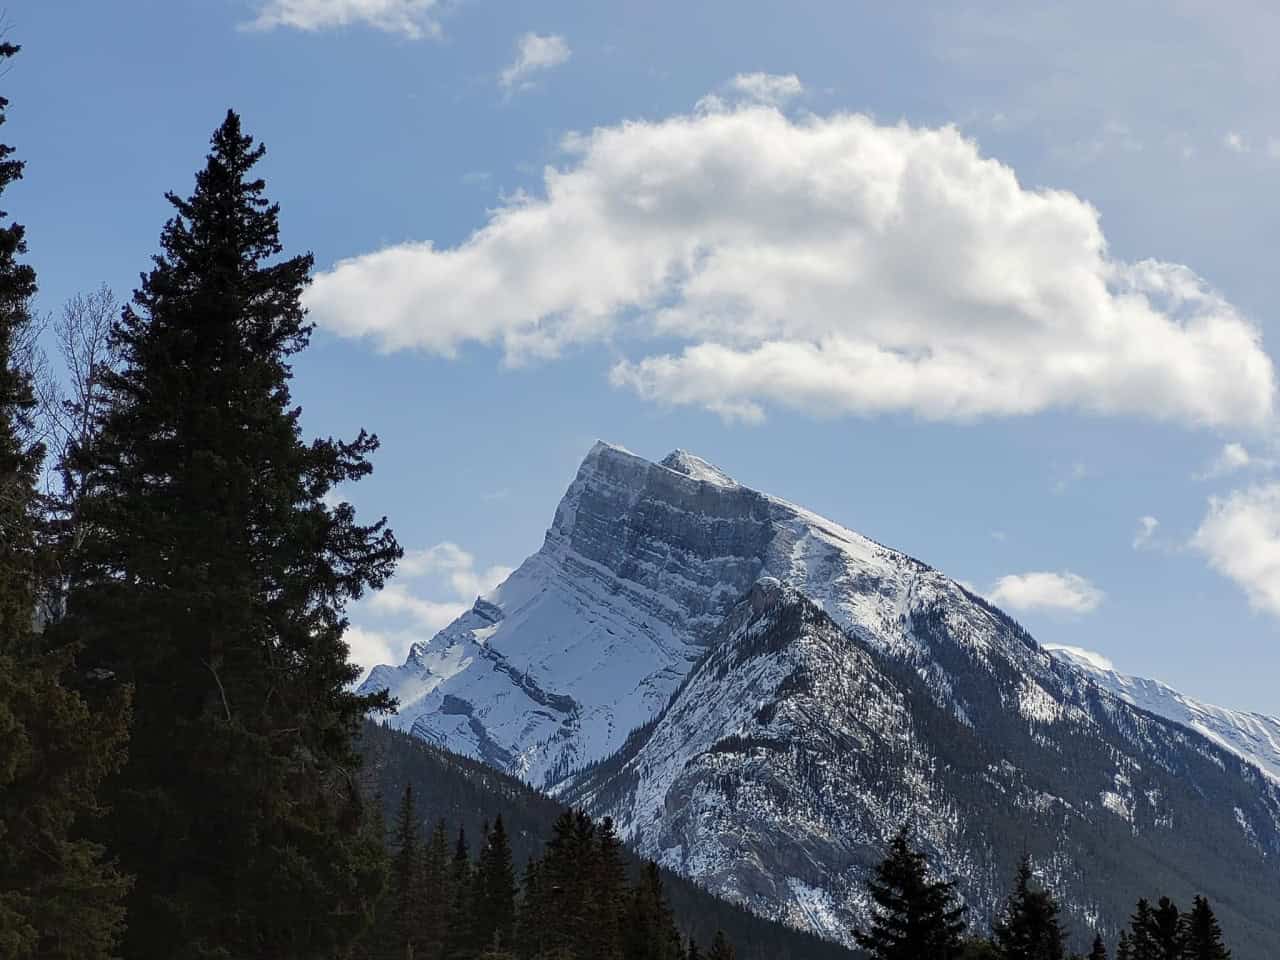 The Views - Sports Tournaments & Sightseeing - Banff Alberta Canada 2024-04-15 - The views surrounding the Fenlands Recreation Centre in Banff are beautiful. Prettiest parking lot l have ever spent time waiting in. 
Banff Alberta Canada